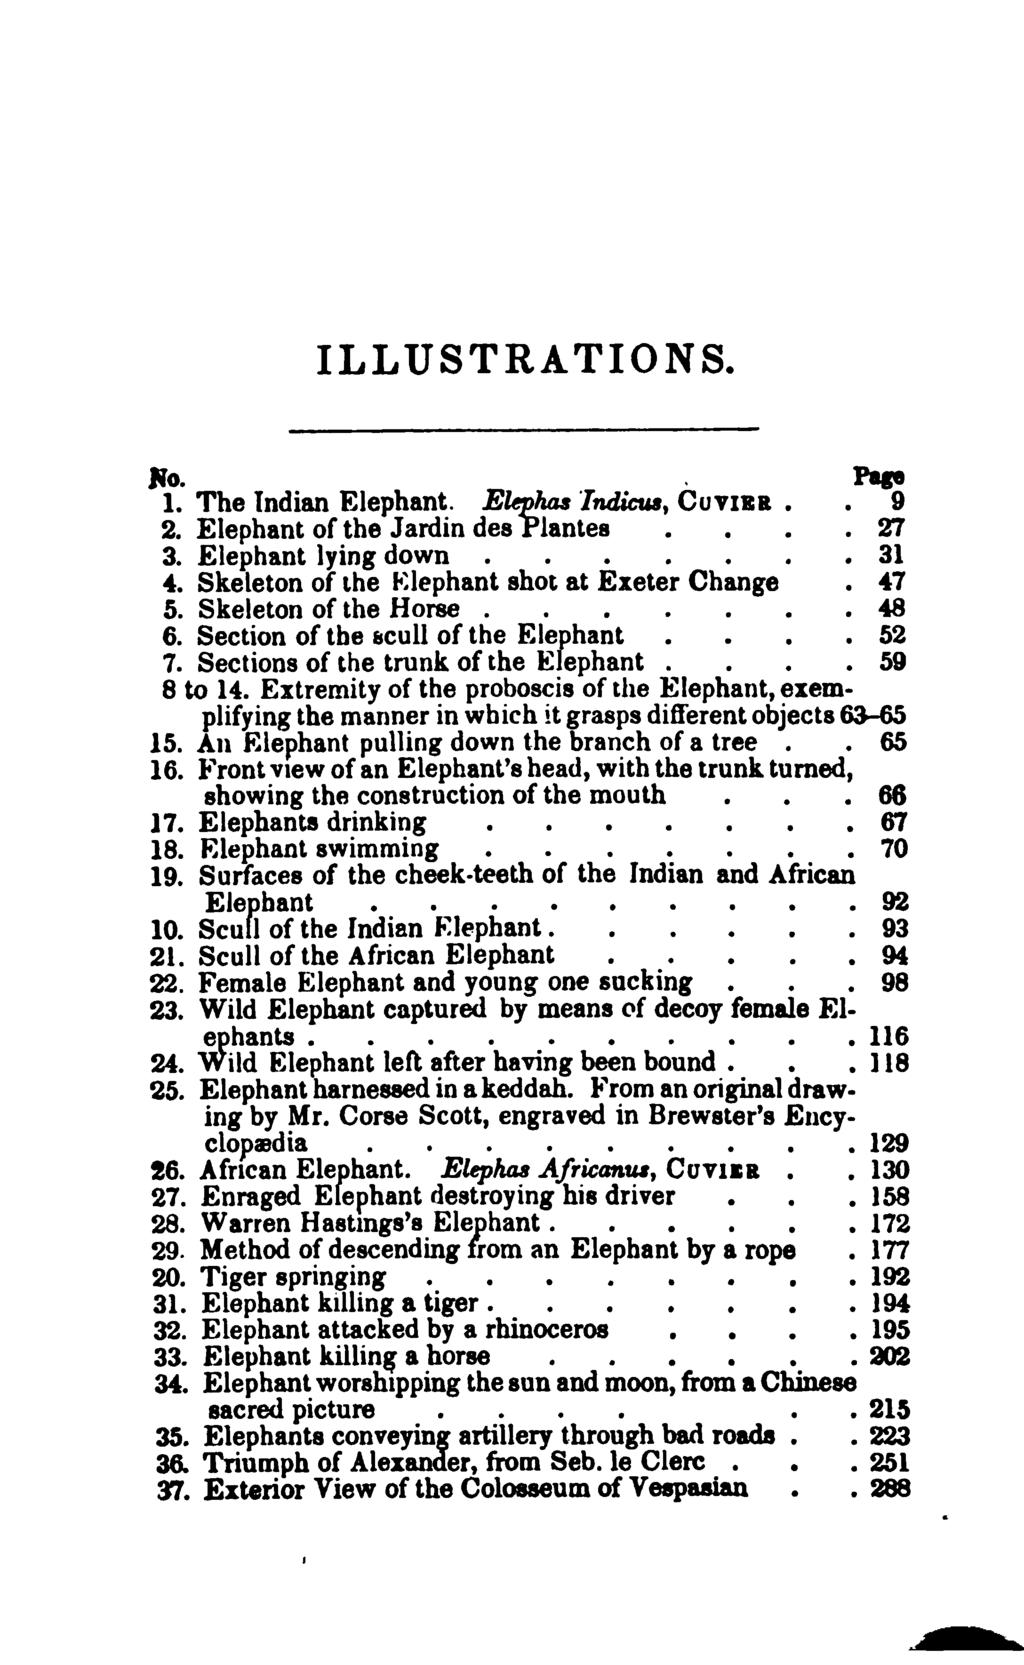 ILLUSTRATIONS. No. Page 1. The Indian Elephant. Elephas Indicus, CoviER.. 9 2. Elephant of the Jardin des Plantes....27 3. Elephant lying down 31 4. Skeleton of the Klephant shot at Exeter Change.